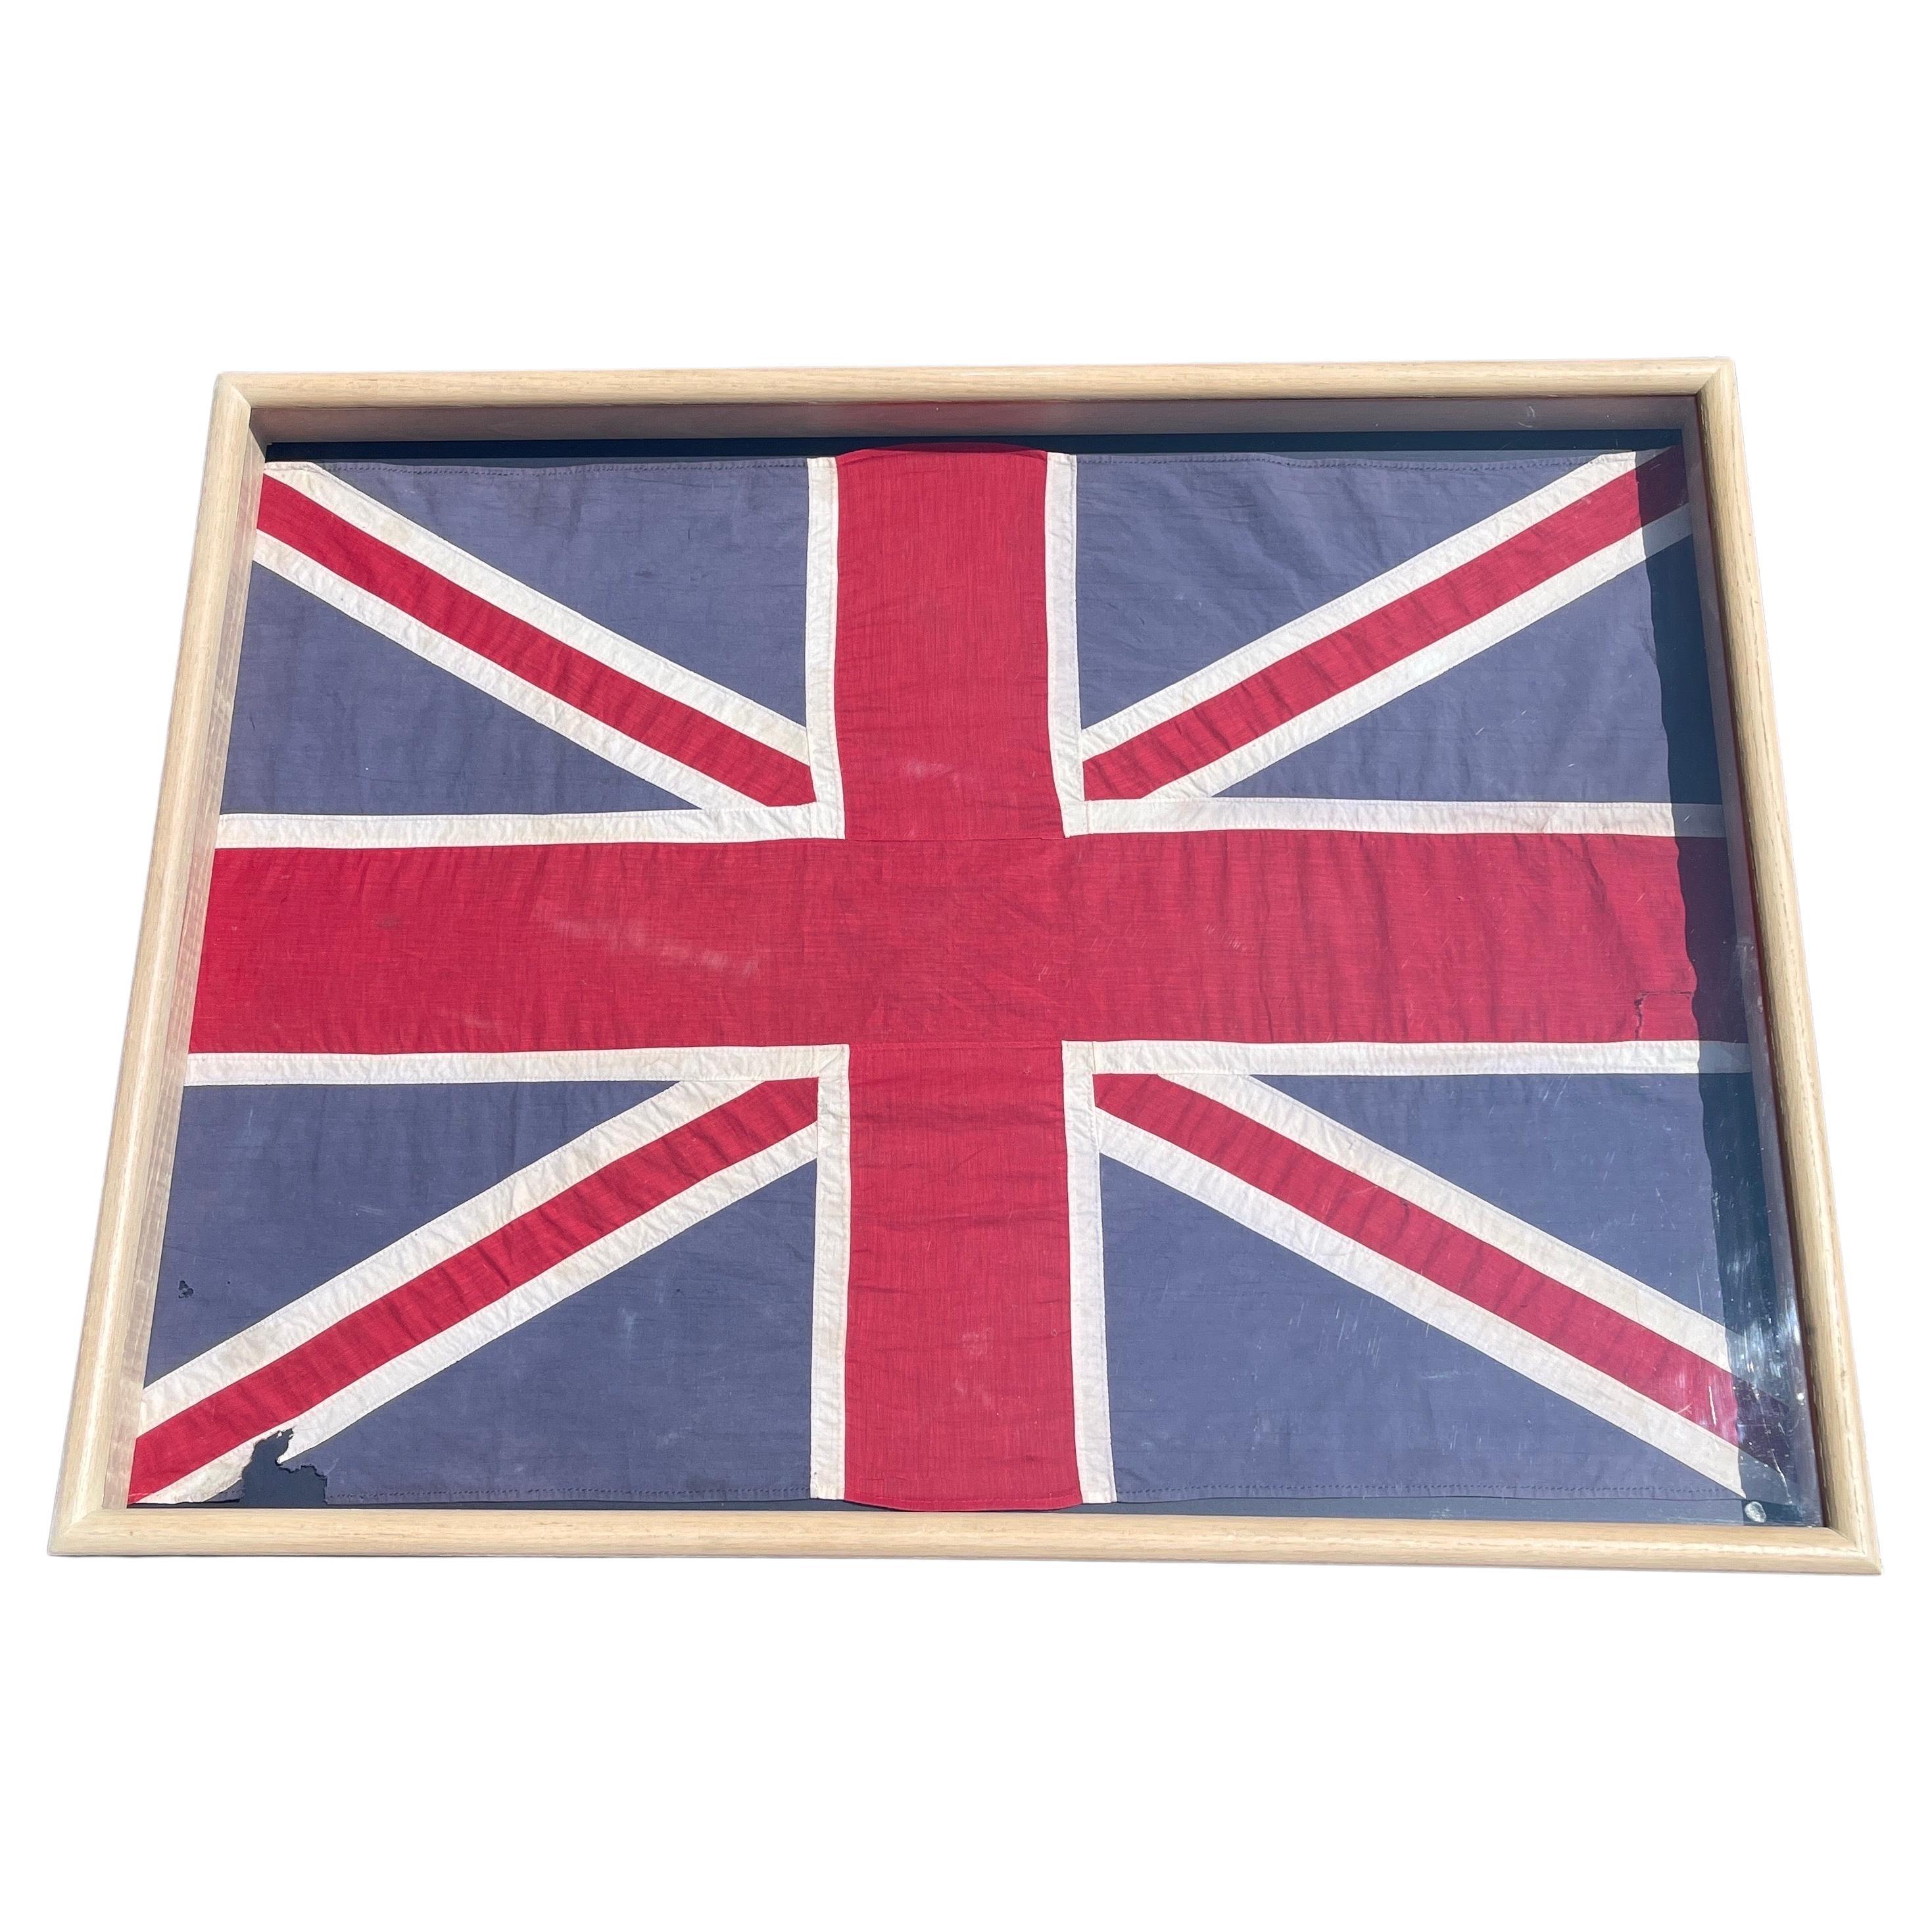 1950’s Union Jack Flag Framed, London England

This vintage British flag was purchased in London many years ago. This red, white and blue Union Jack from the 1950’s has been encased in a neutral wood frame with plexiglass. Wonderful addition to any